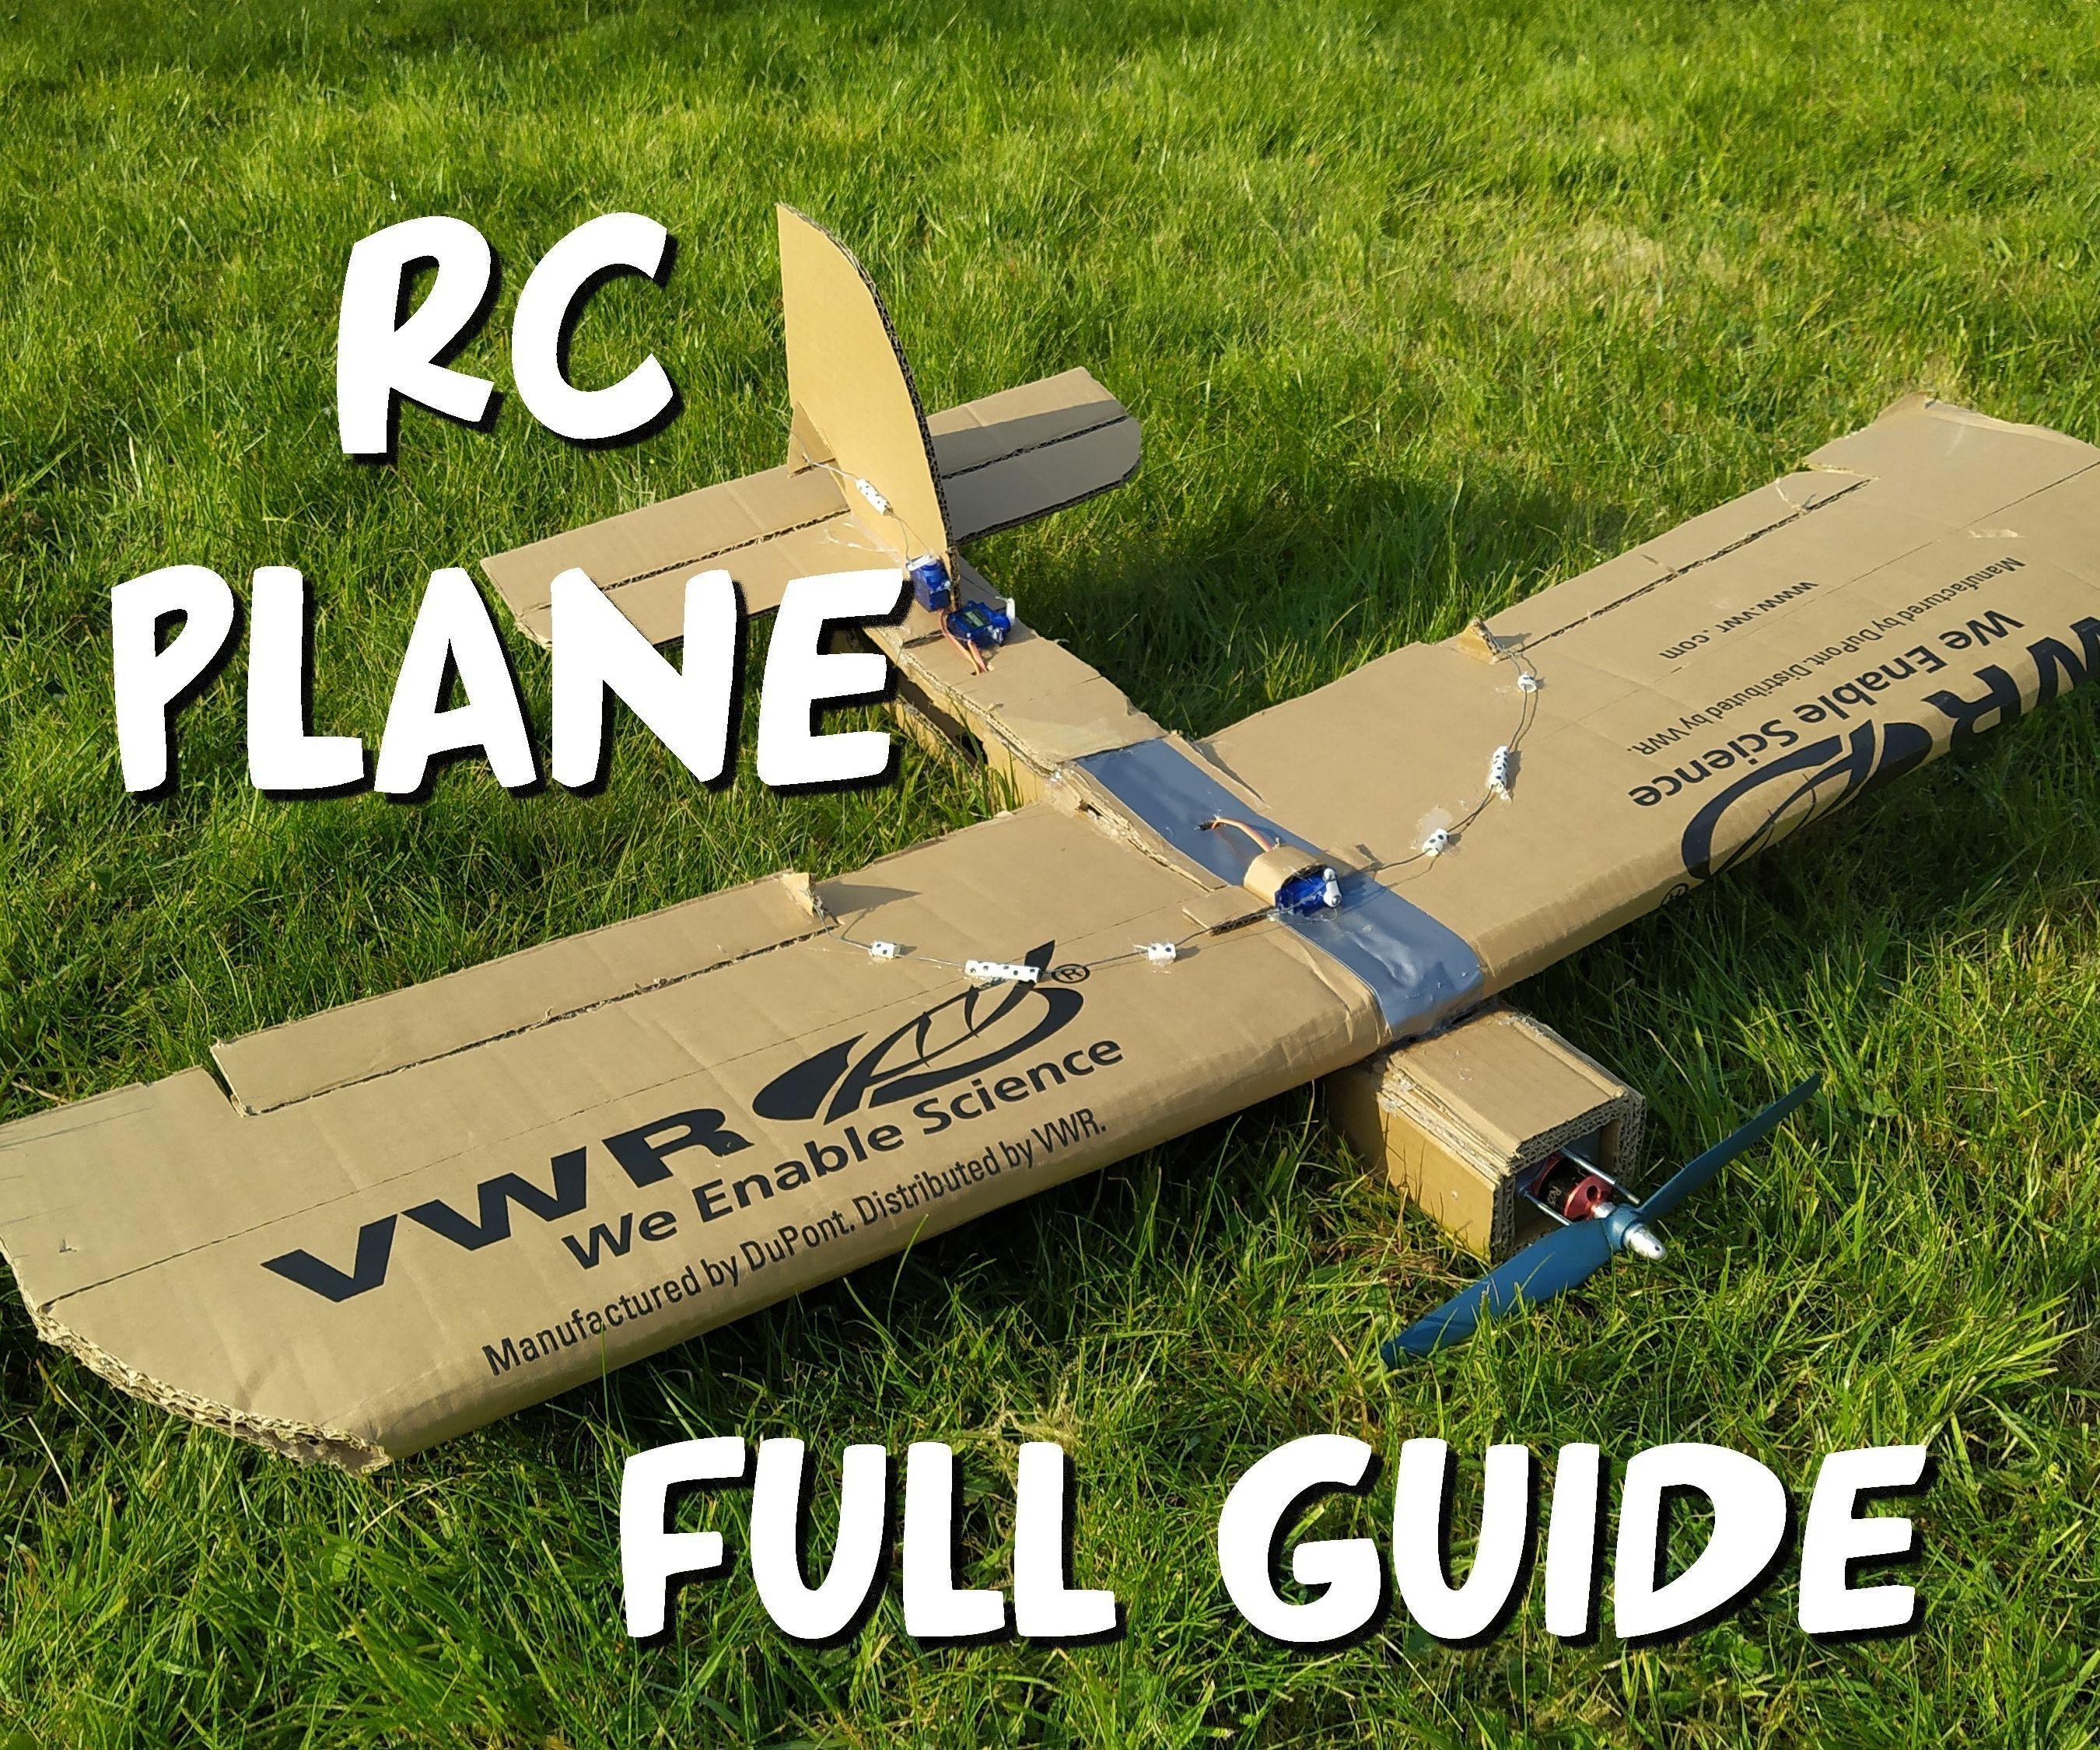 Aeroplane Remote Control Aeroplane Remote Control: Maintaining and Repairing Your Aeroplane Remote Control Plane